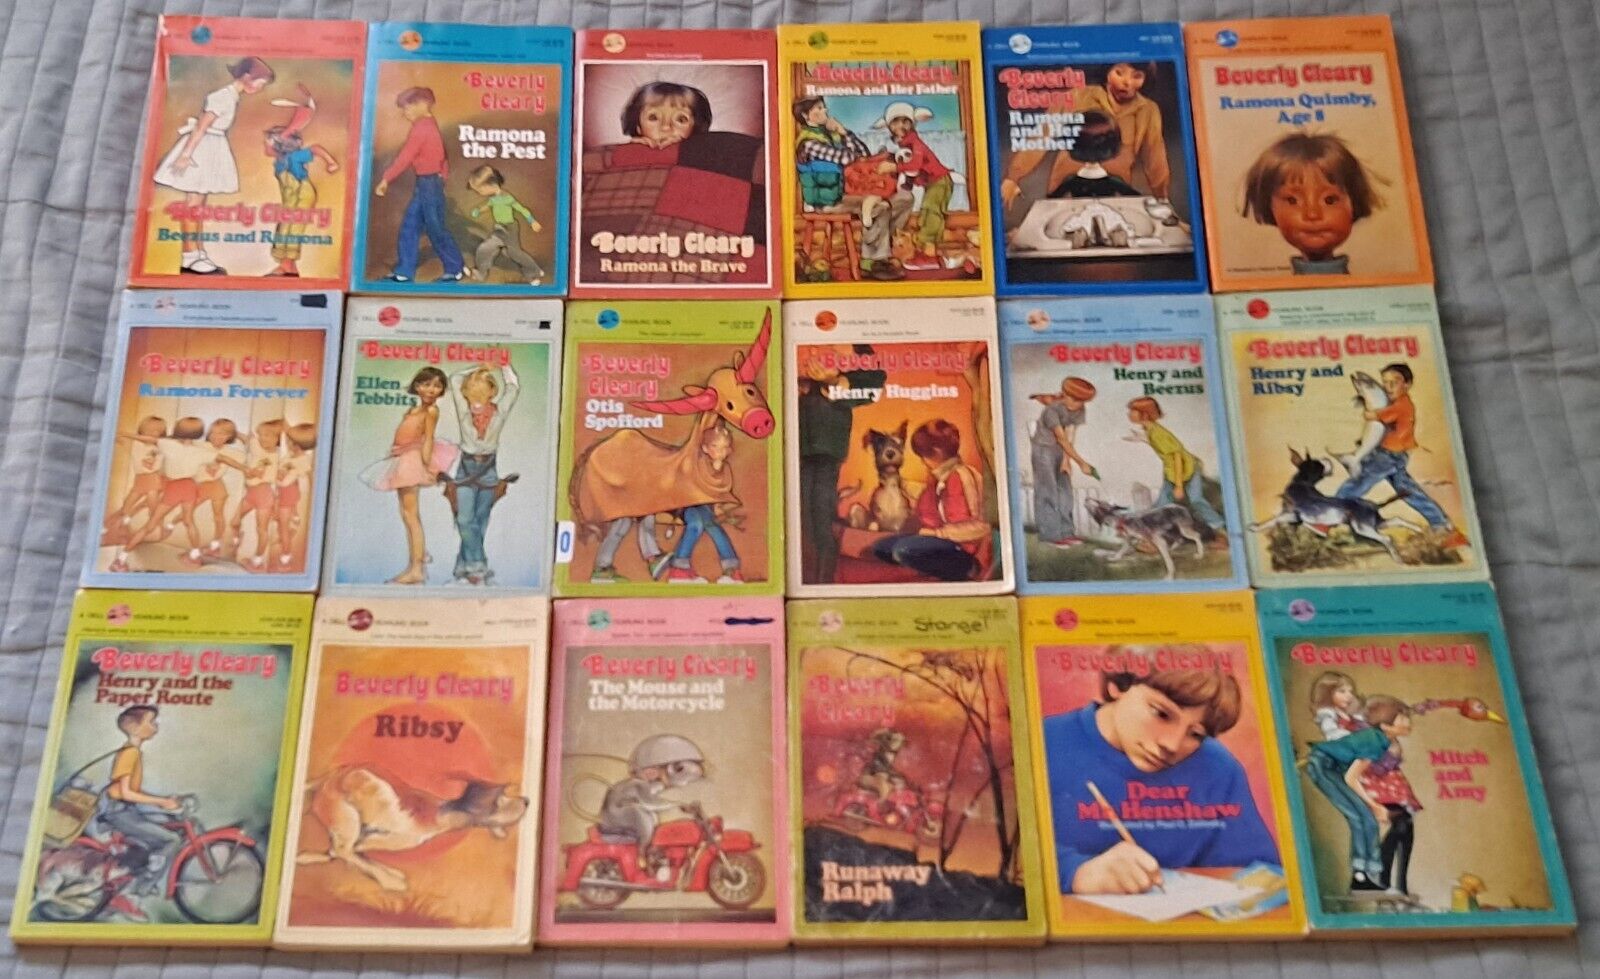 18 BEVERLY CLEARY Vintage DELL YEARLING Paperbacks RAMONA QUIMBY & More